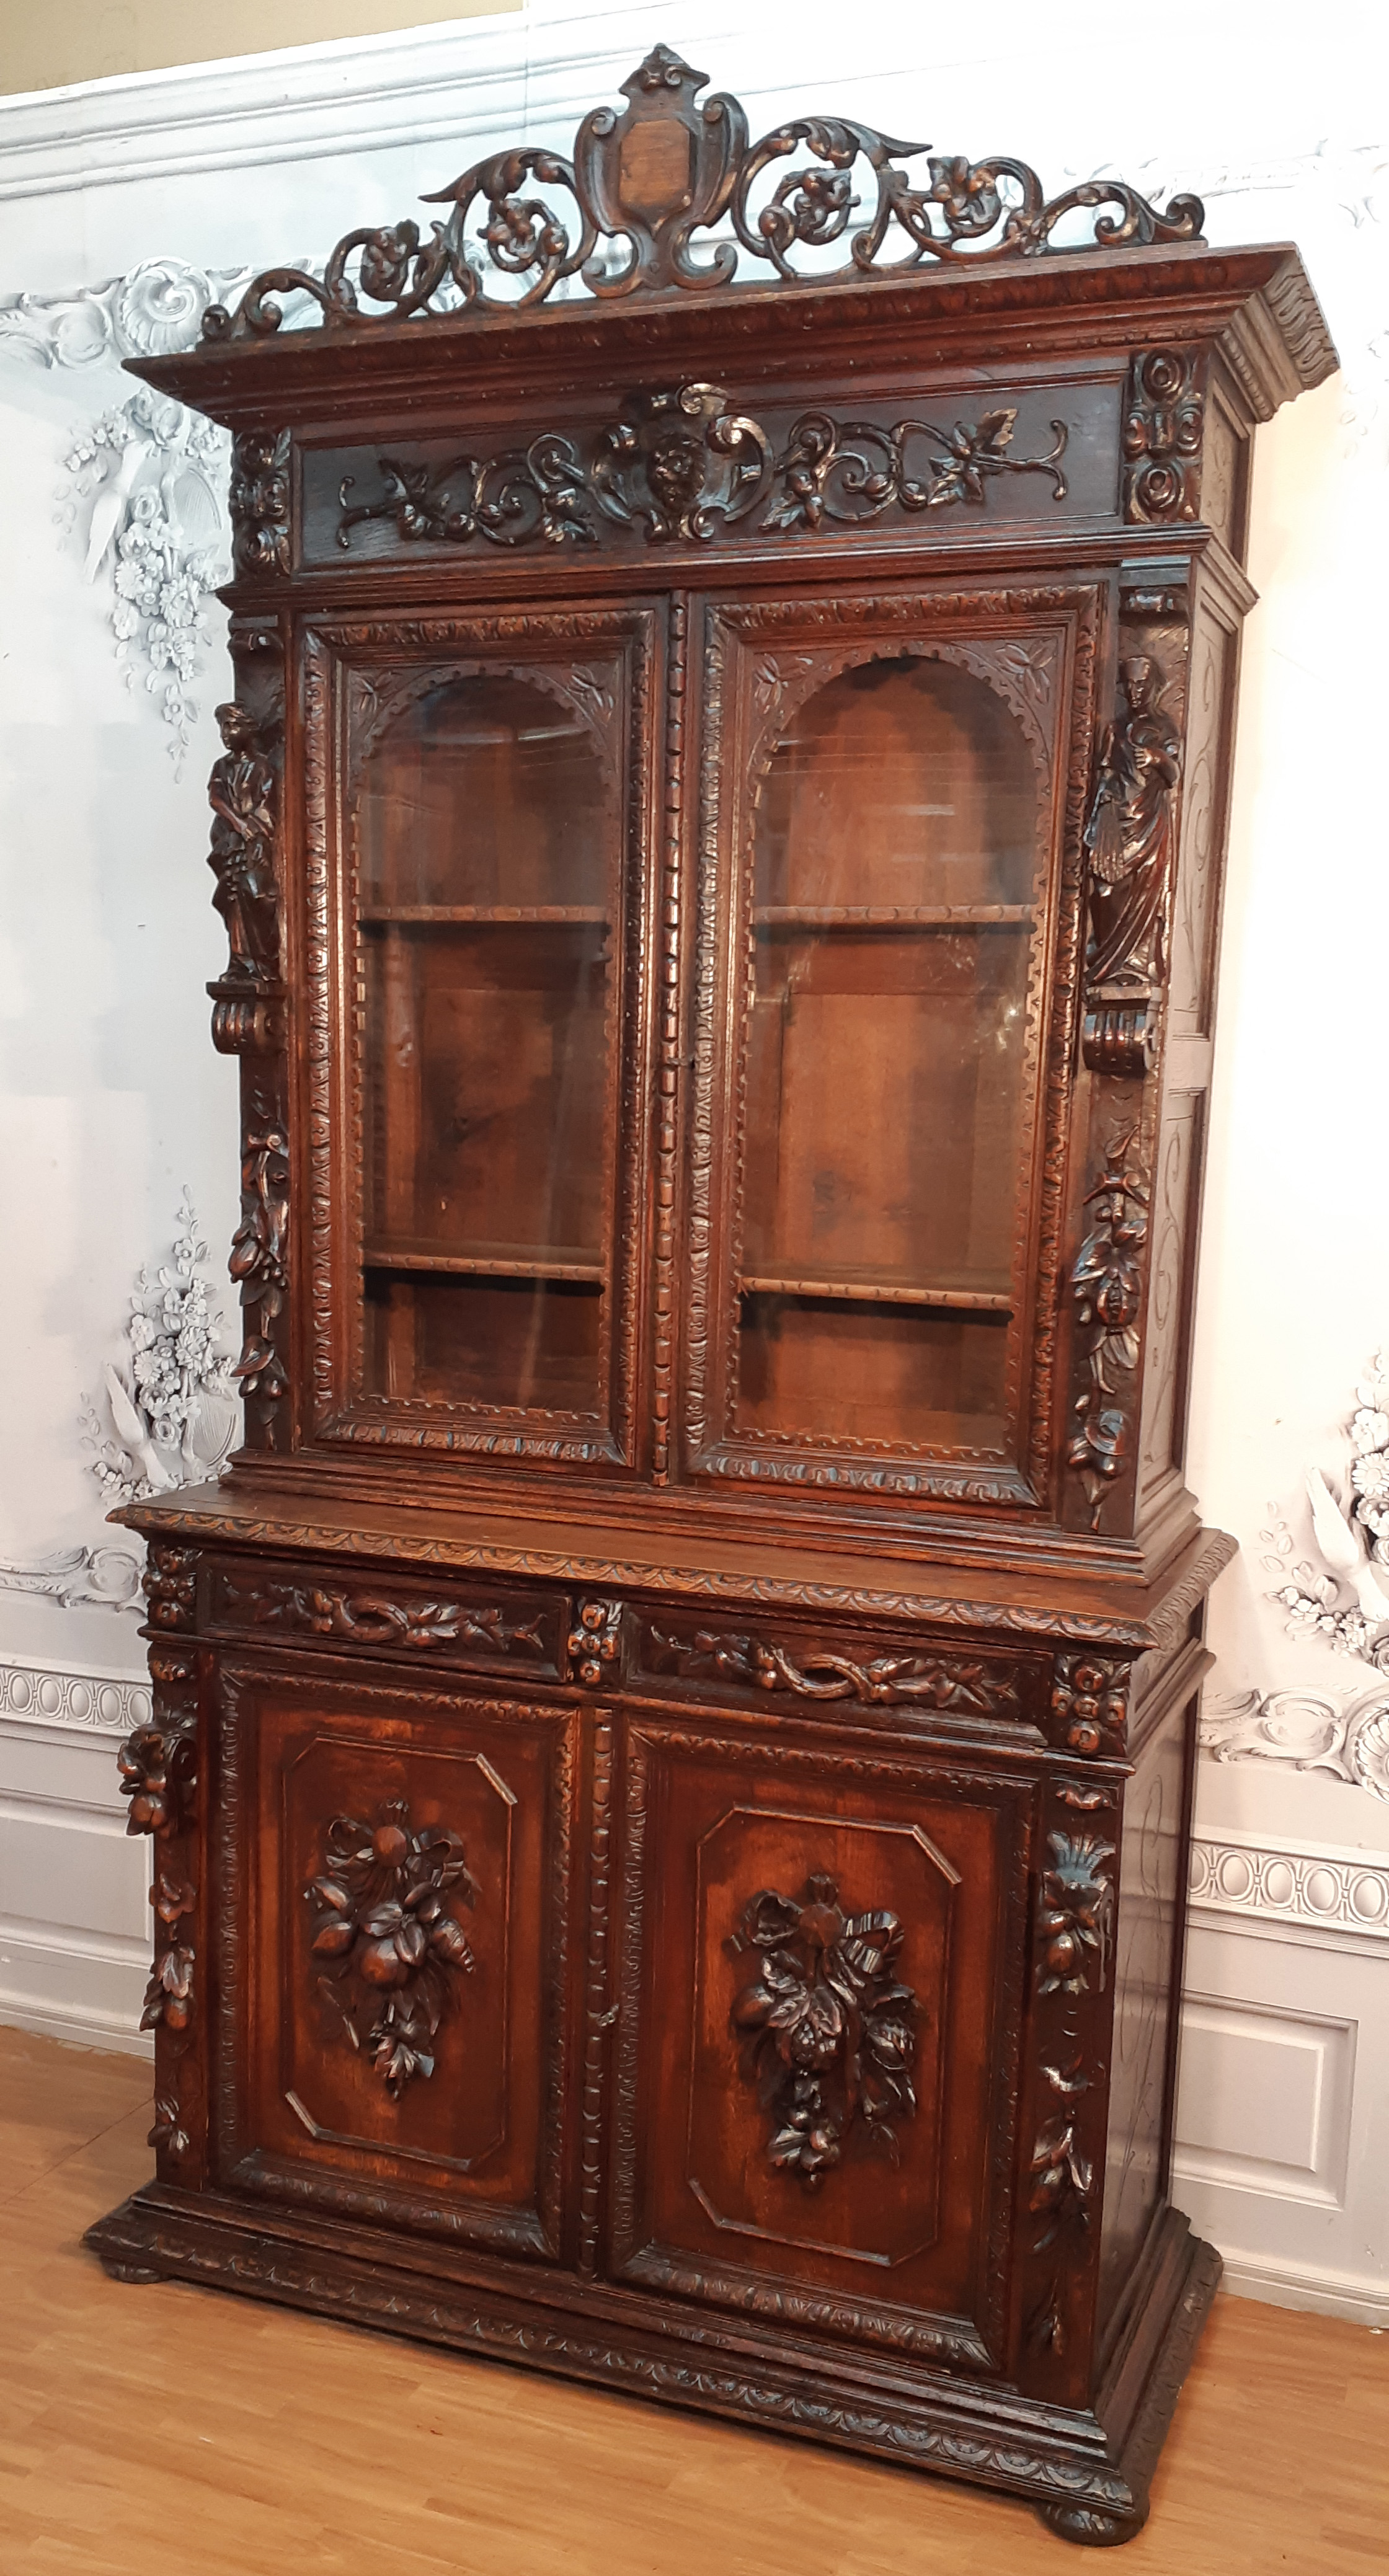 19TH C. FRENCH CARVED OAK BIBLIOTHEQUE